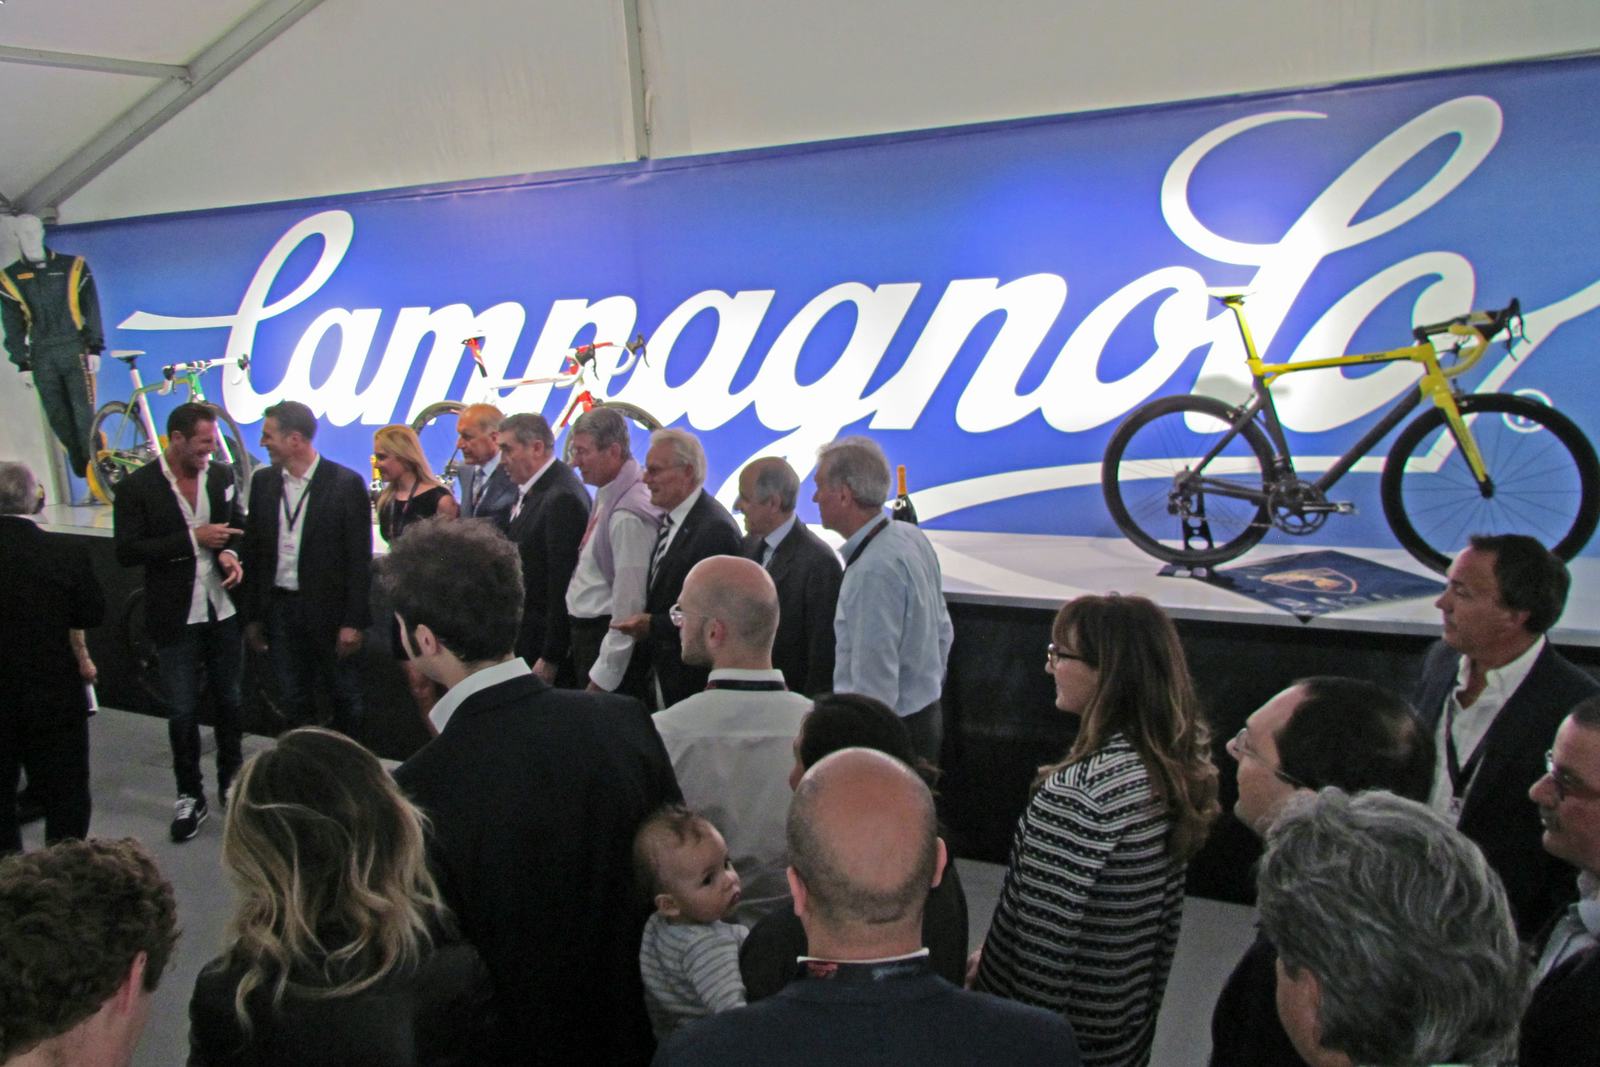 Campagnolo in happier times; at the 80th anniversary of the company in 2013. – Photo Bike Europe